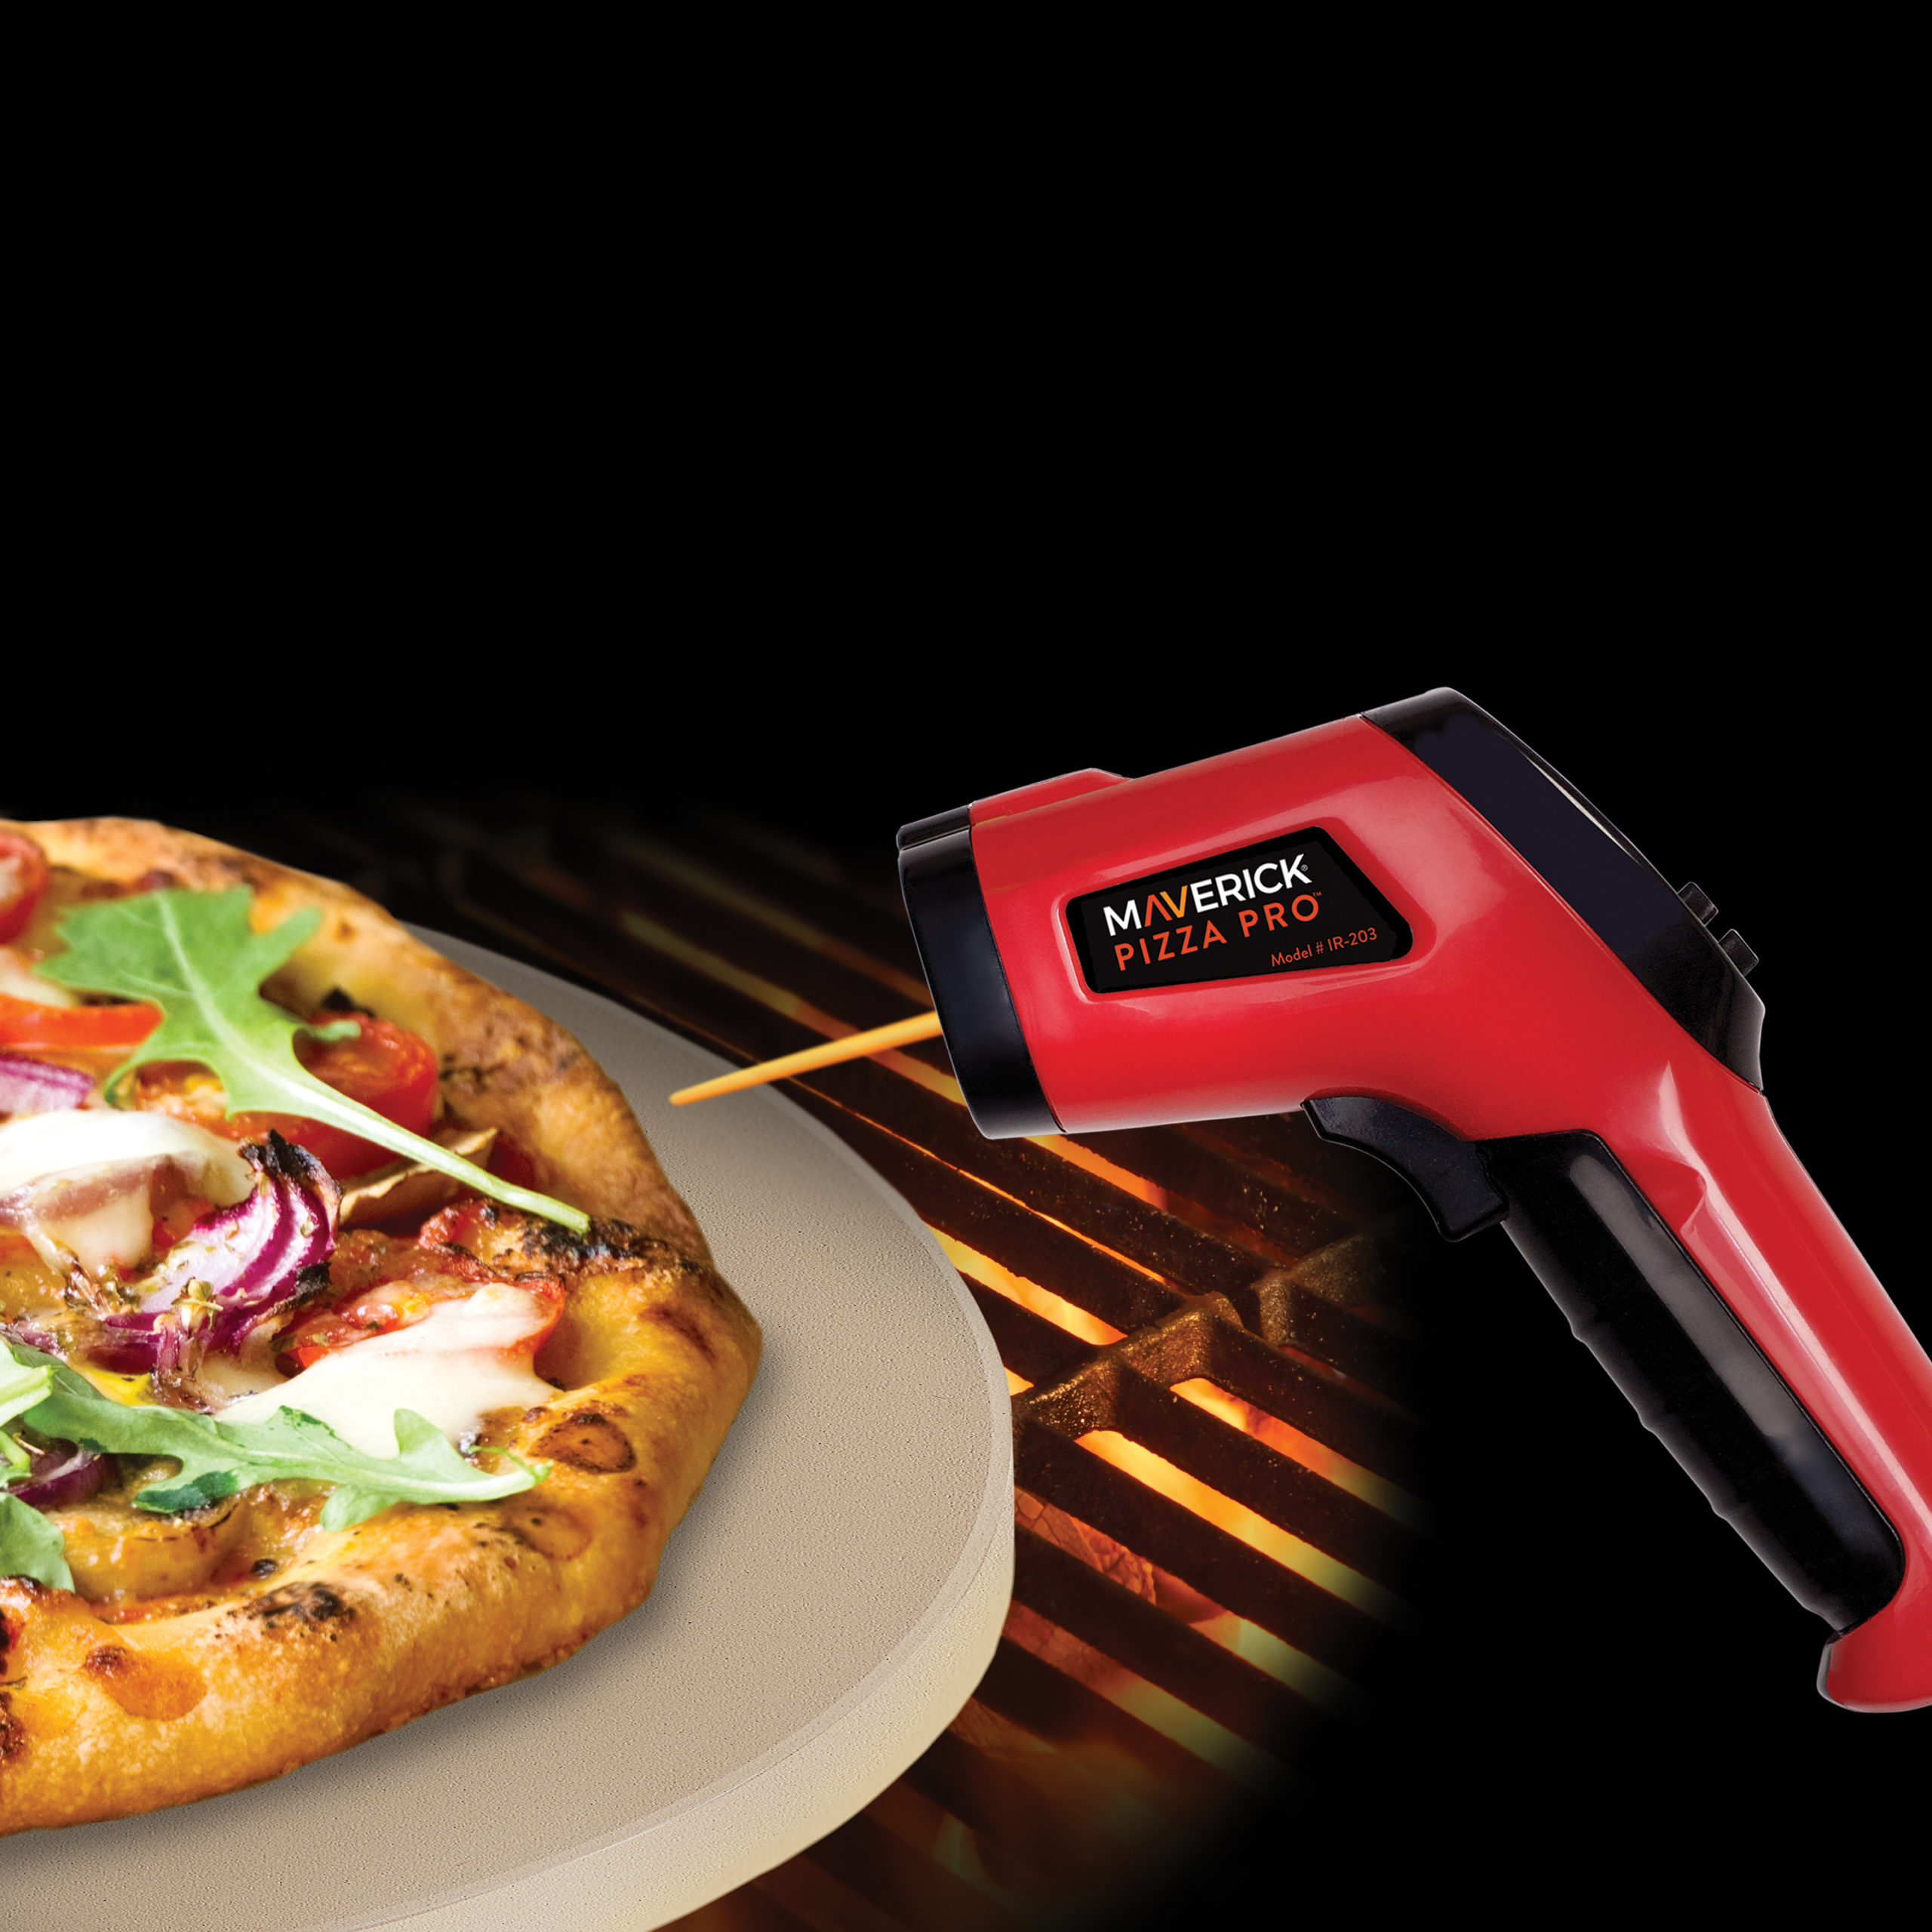 PS-15 PIZZA PRO 15 INCH GRILLING STONE + INFRARED COOKING THERMOMETER KIT